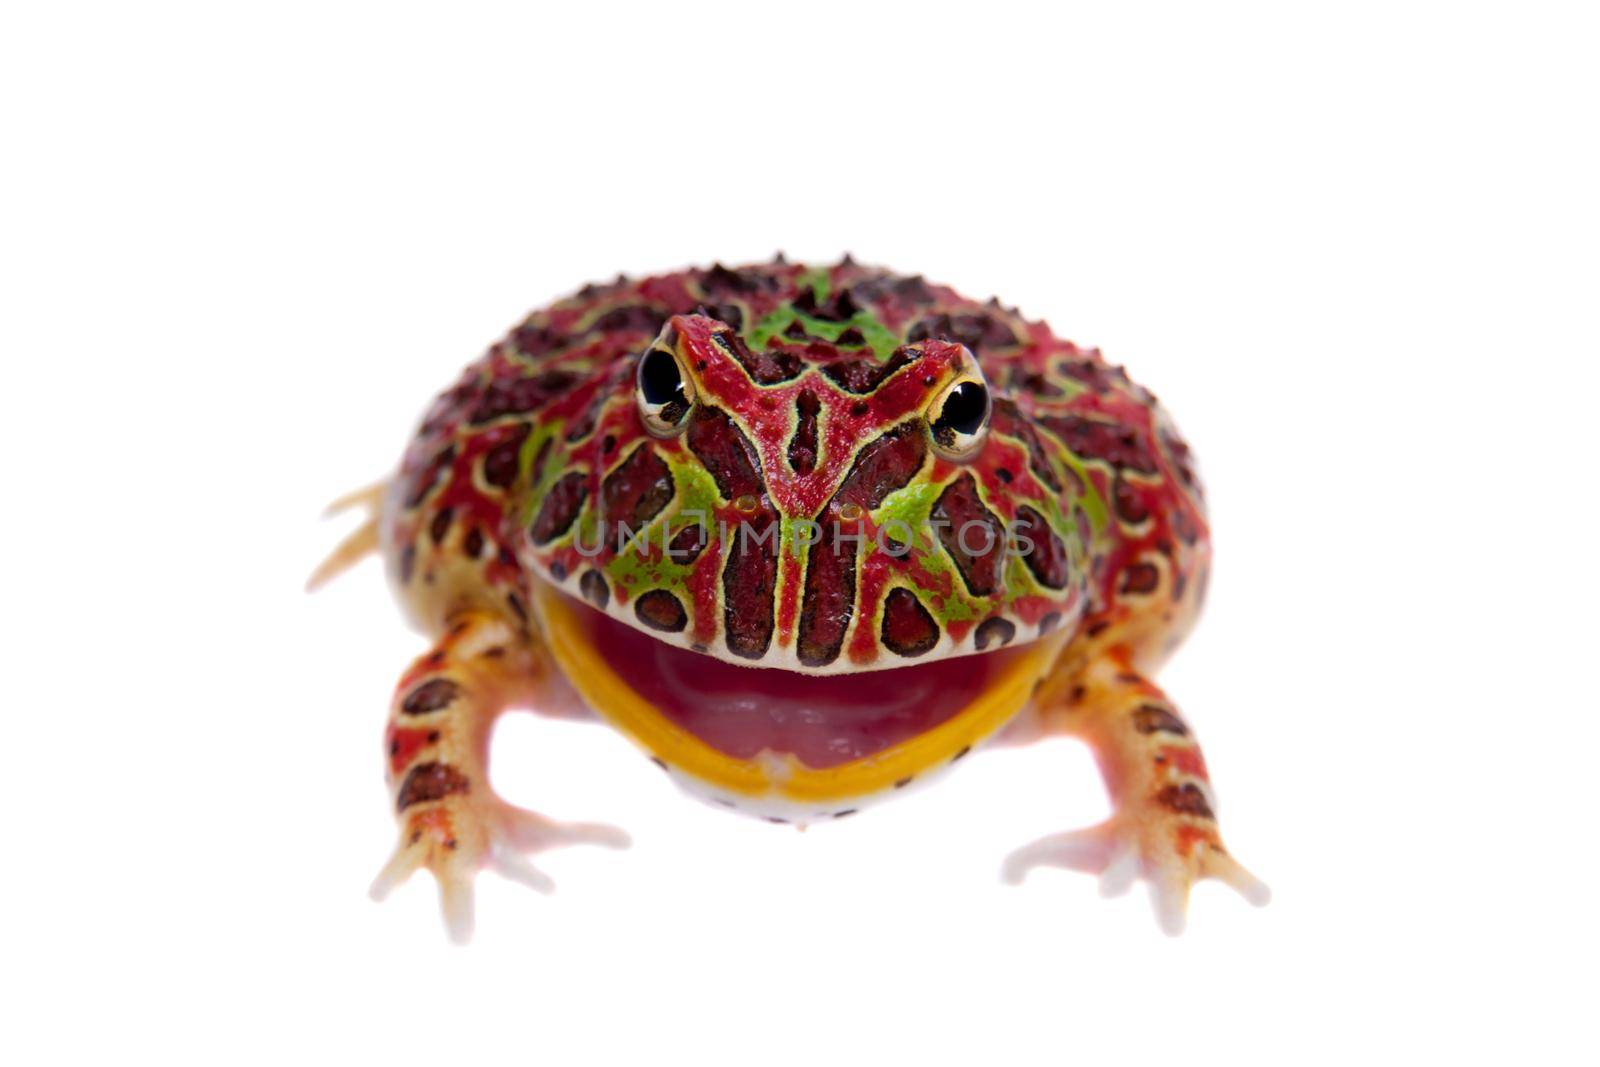 The Argentine horned froglet, Ceratophrys ornata, isolated on white background